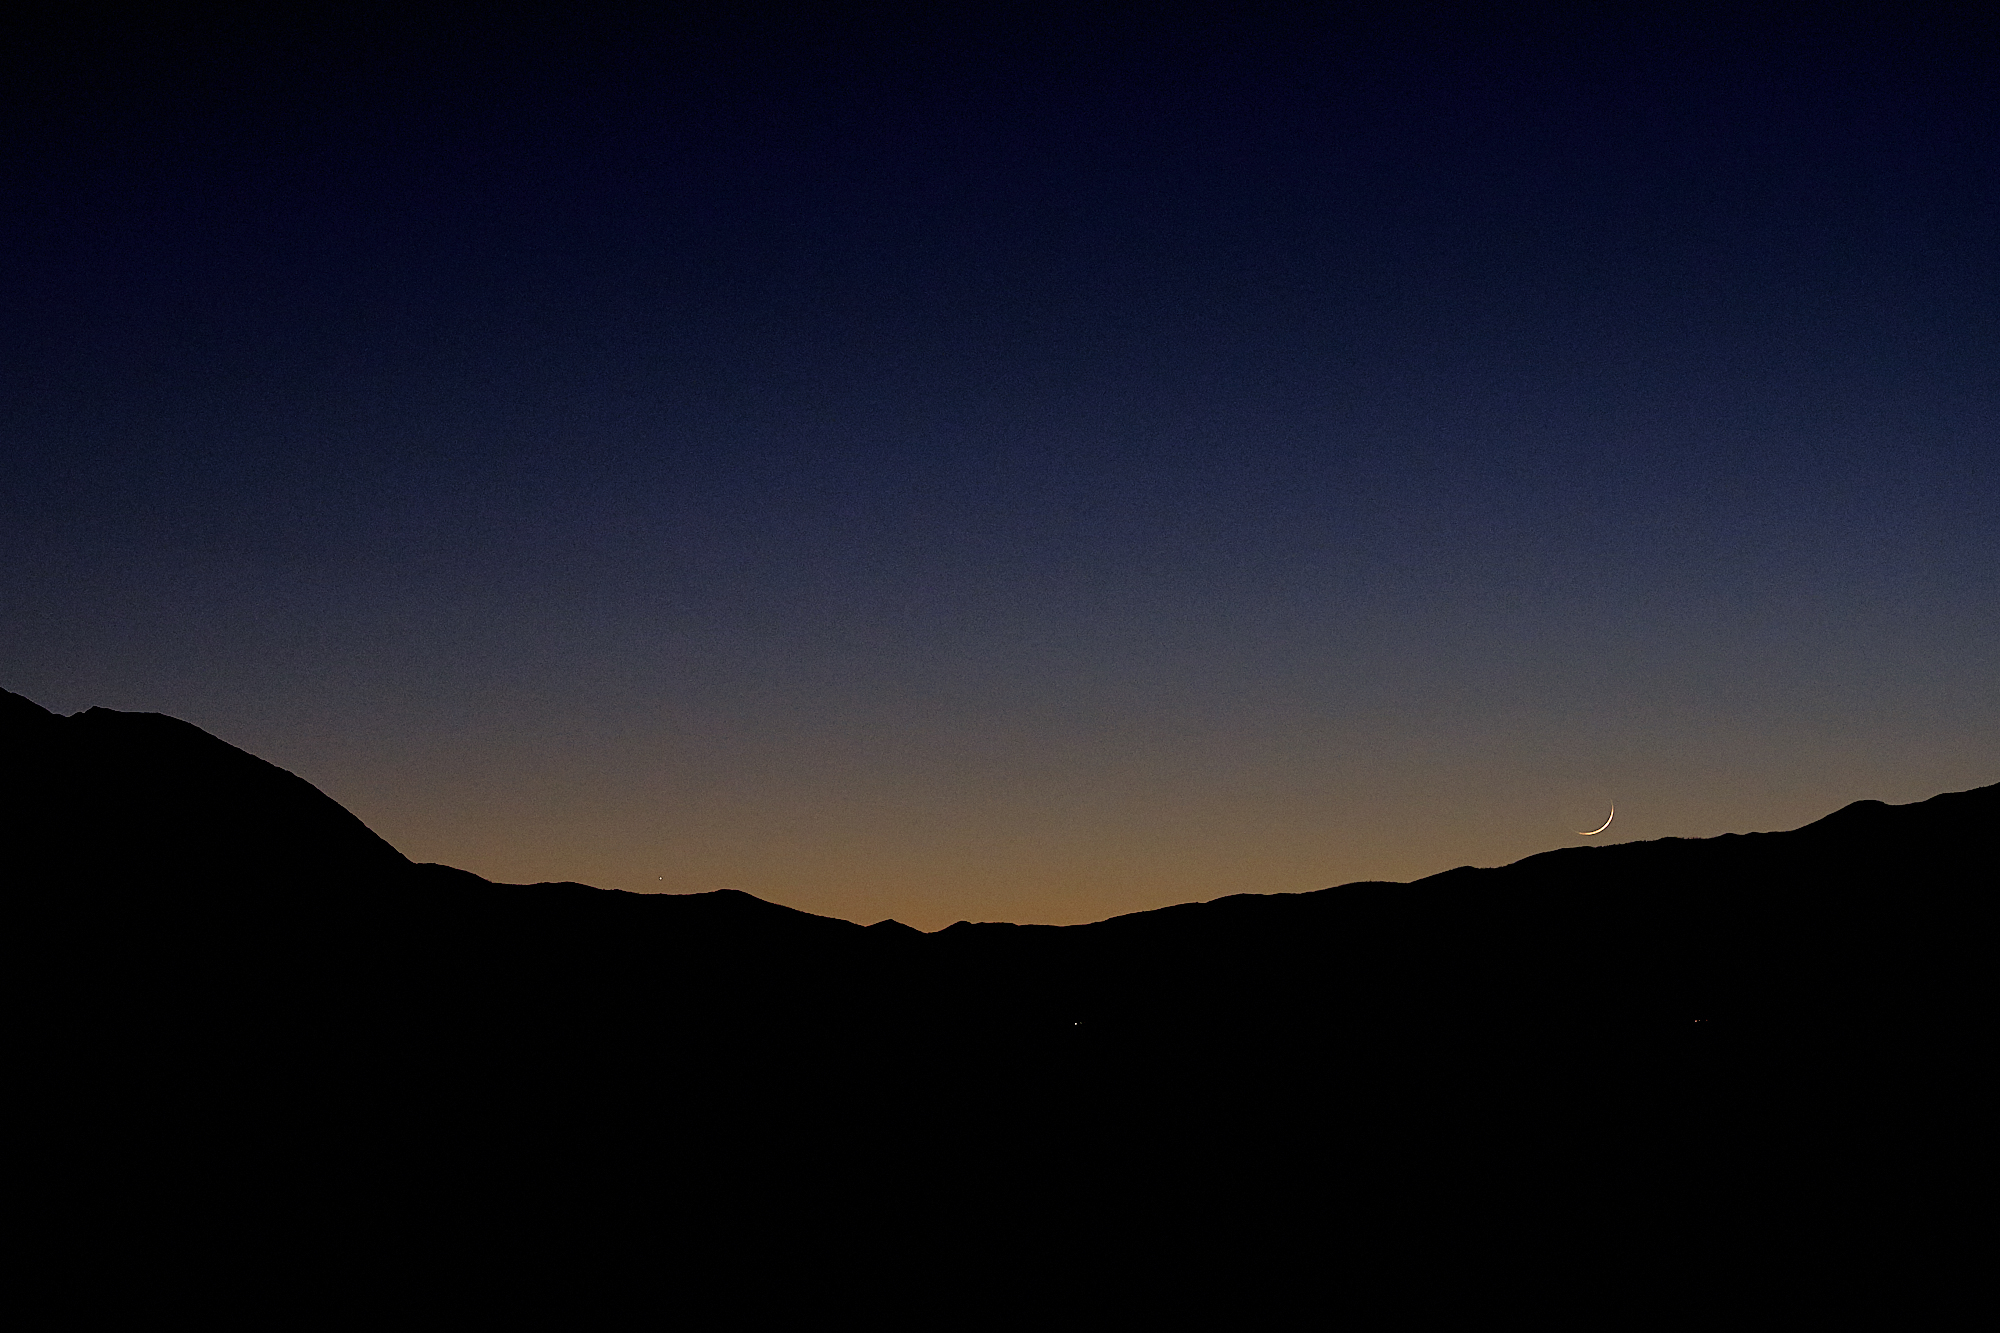  One of the faintest slivers of moon I have ever seen just moments away from dipping below the horizon. | Mt. Charelston, NV 11/8/18 